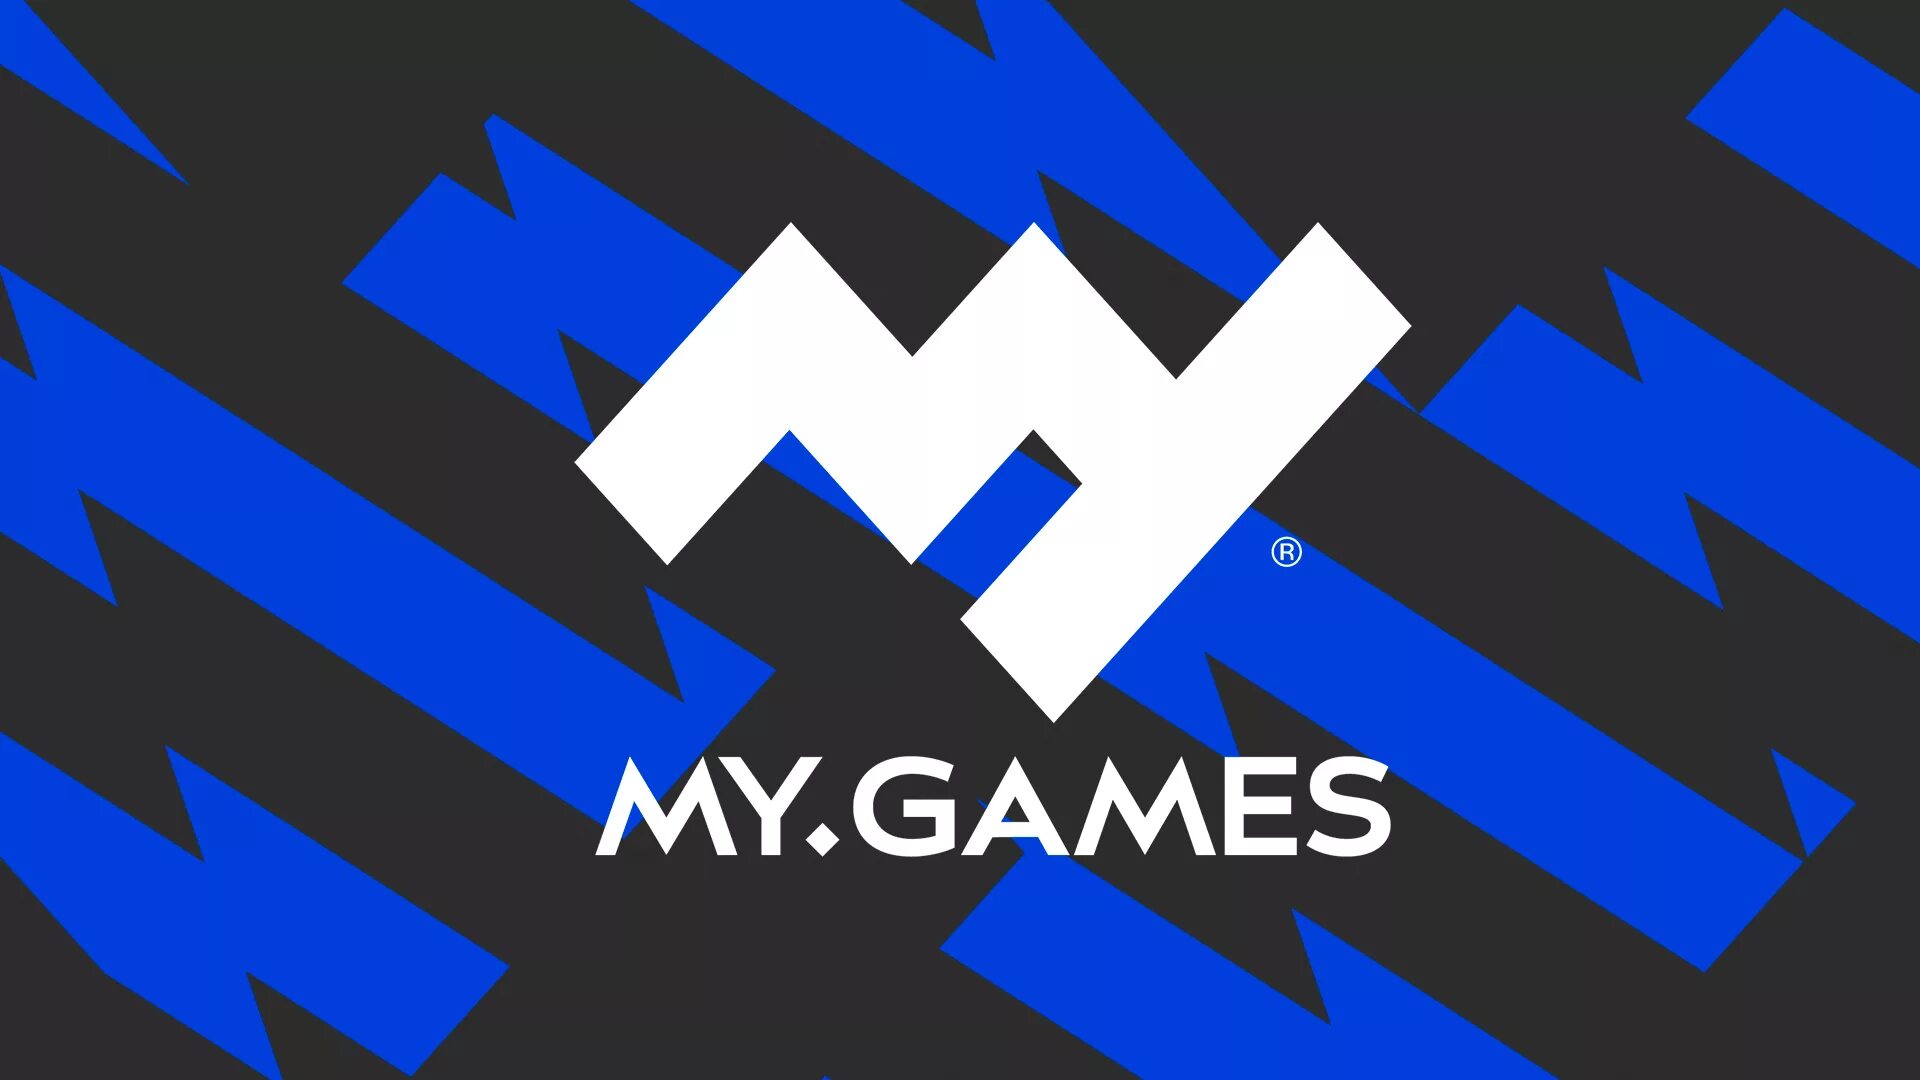 My games out. My games. Mygames лого. Mygames mail ru. My games cloud игры.